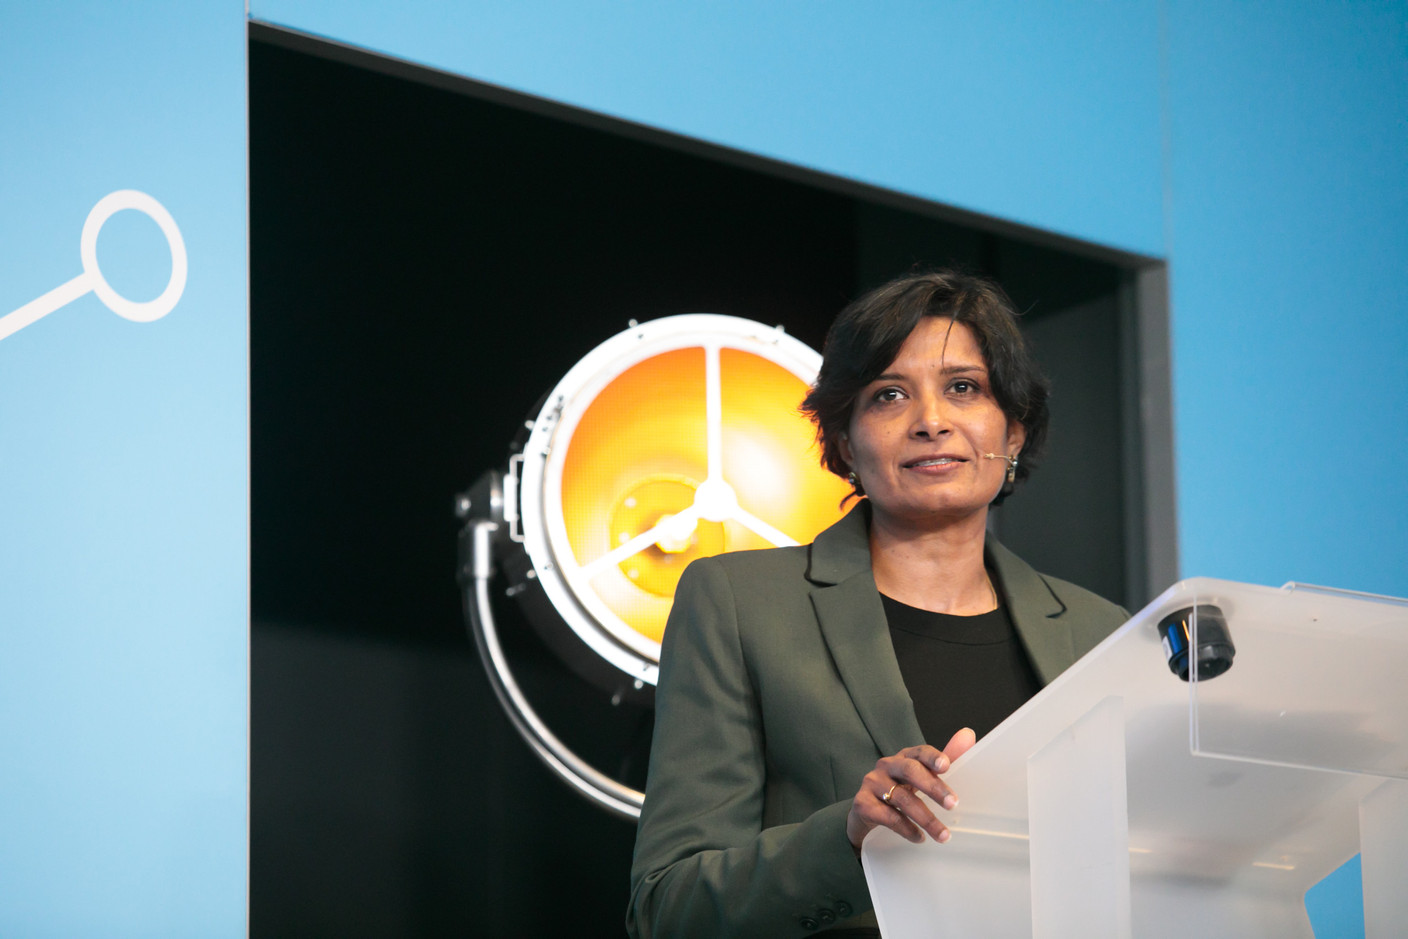 Kavitha Ramachandran of Maitland chaired the morning session on day one of Alfi’s European Asset Management Conference, 22 March 2022. Photo: Matic Zorman